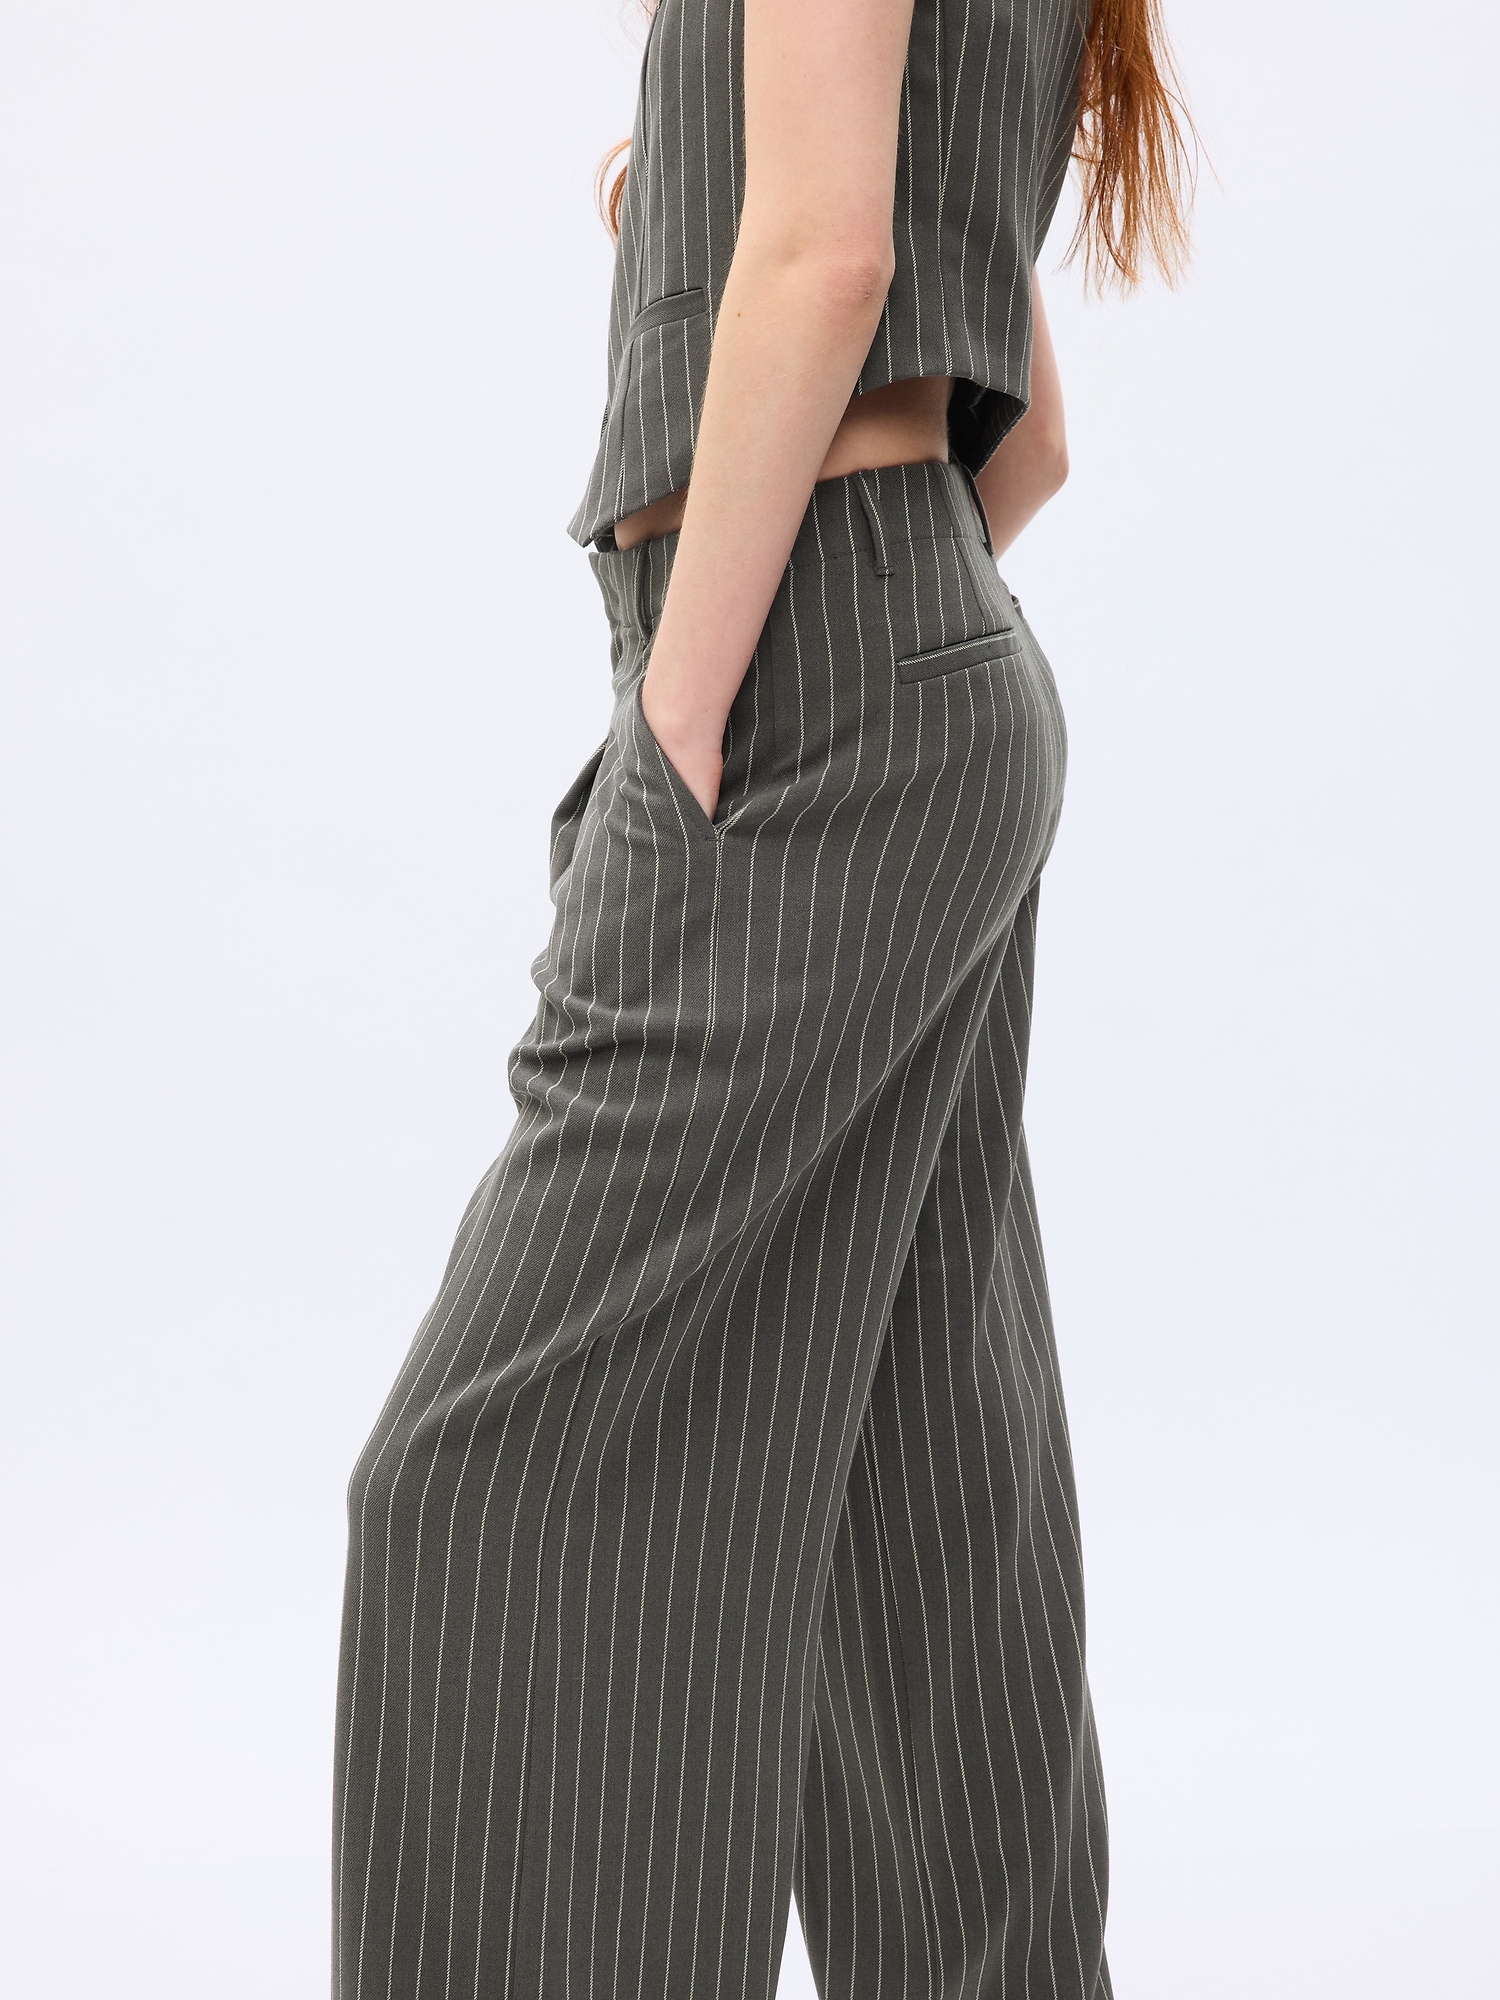 Solid Color Pleated Wide Leg Pants for Women Elastric High Waist